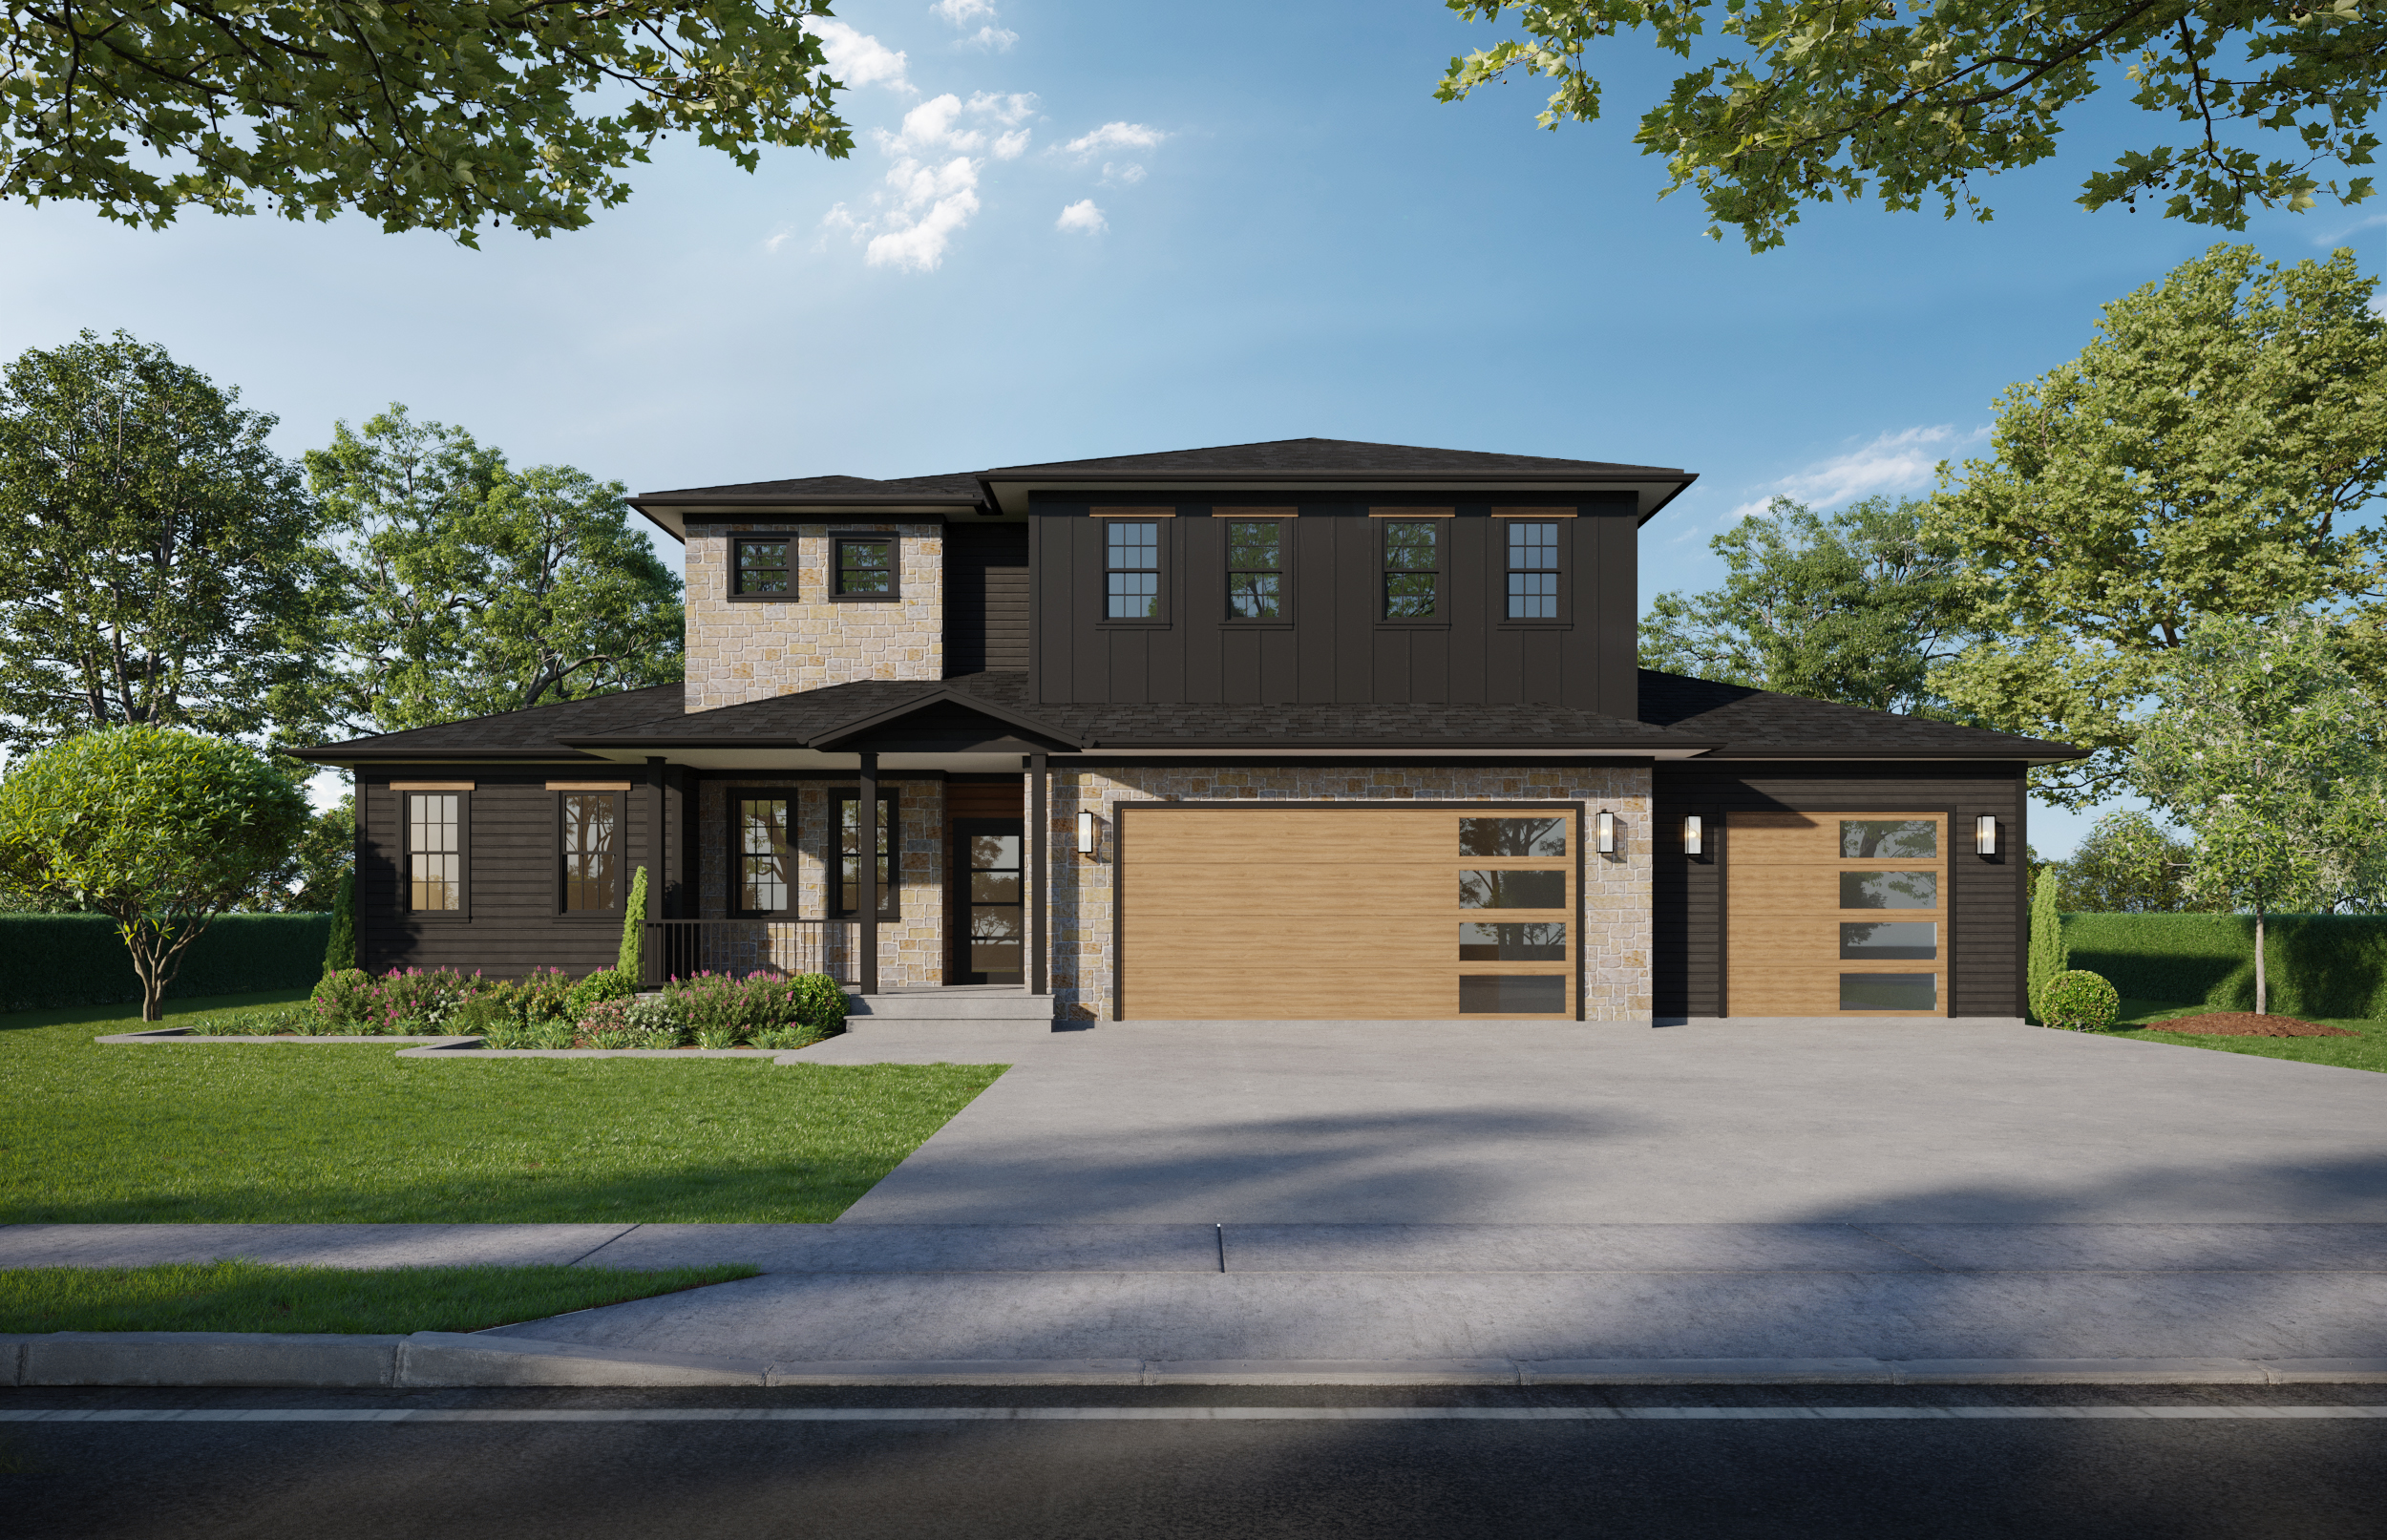 Main image of The Aspen, built by Vista Homes